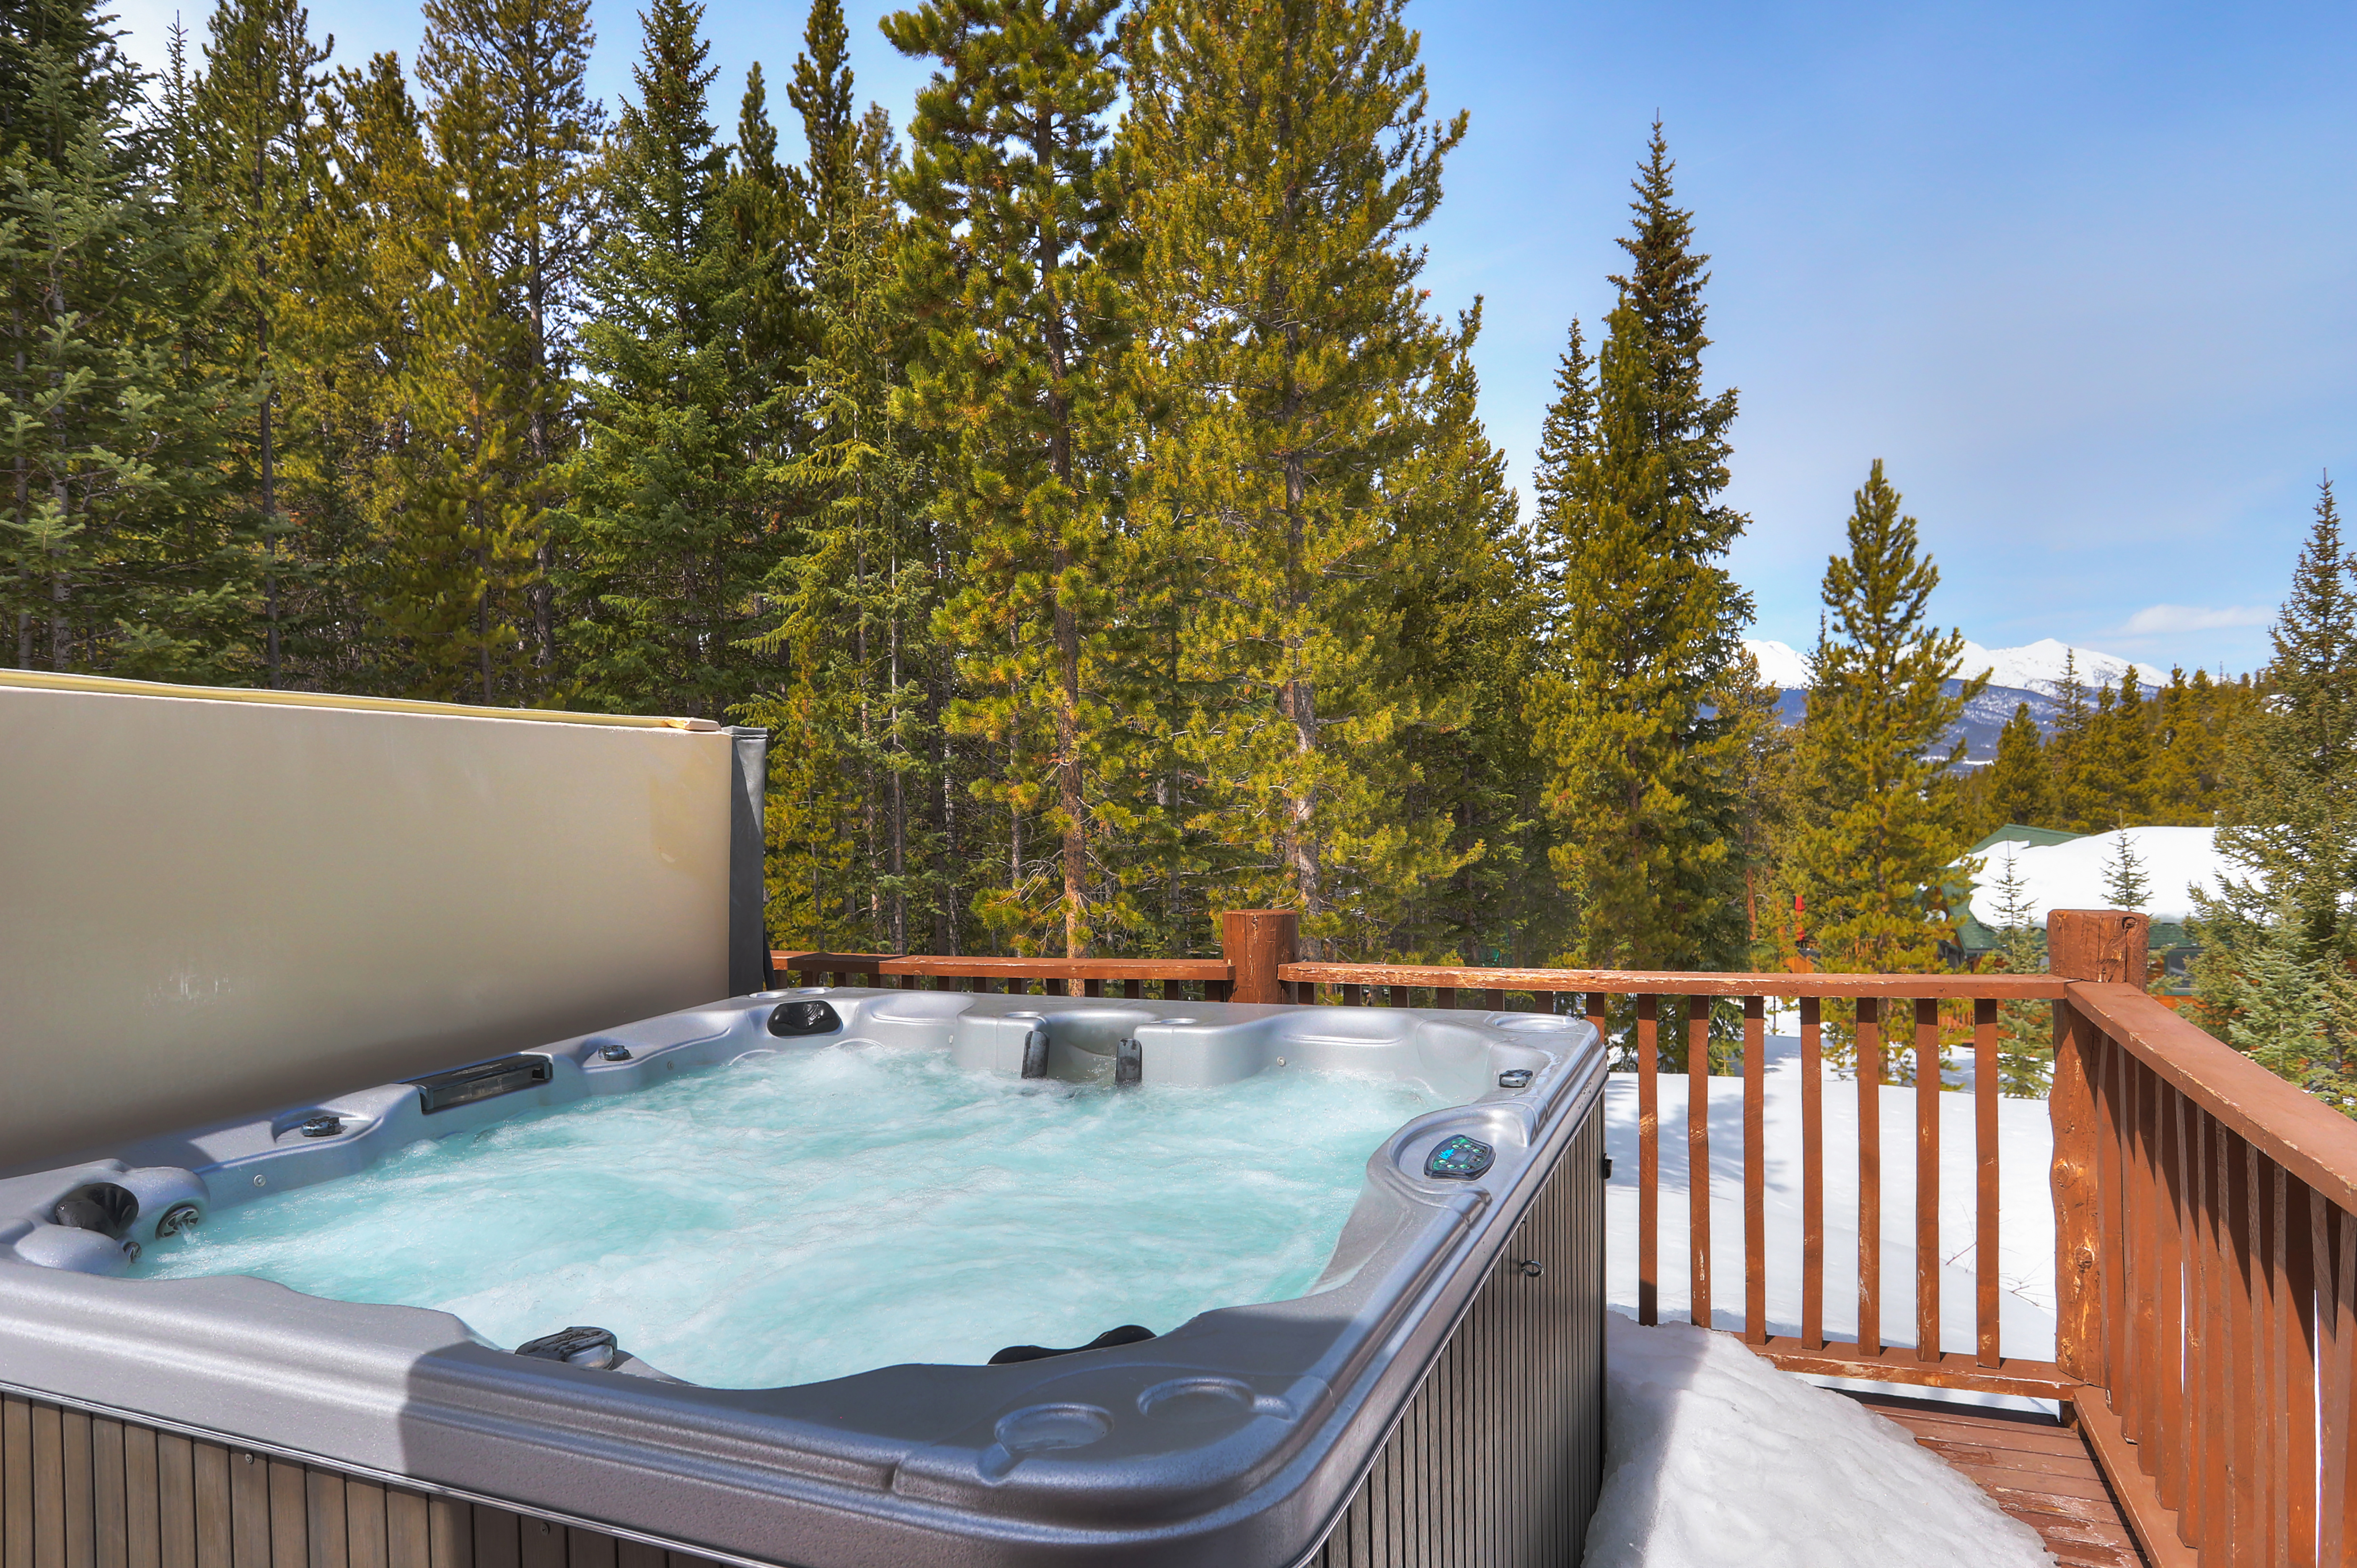 Hot Tub, located on the deck - Lodge at Boreas Pass Breckenridge Vacation Rental